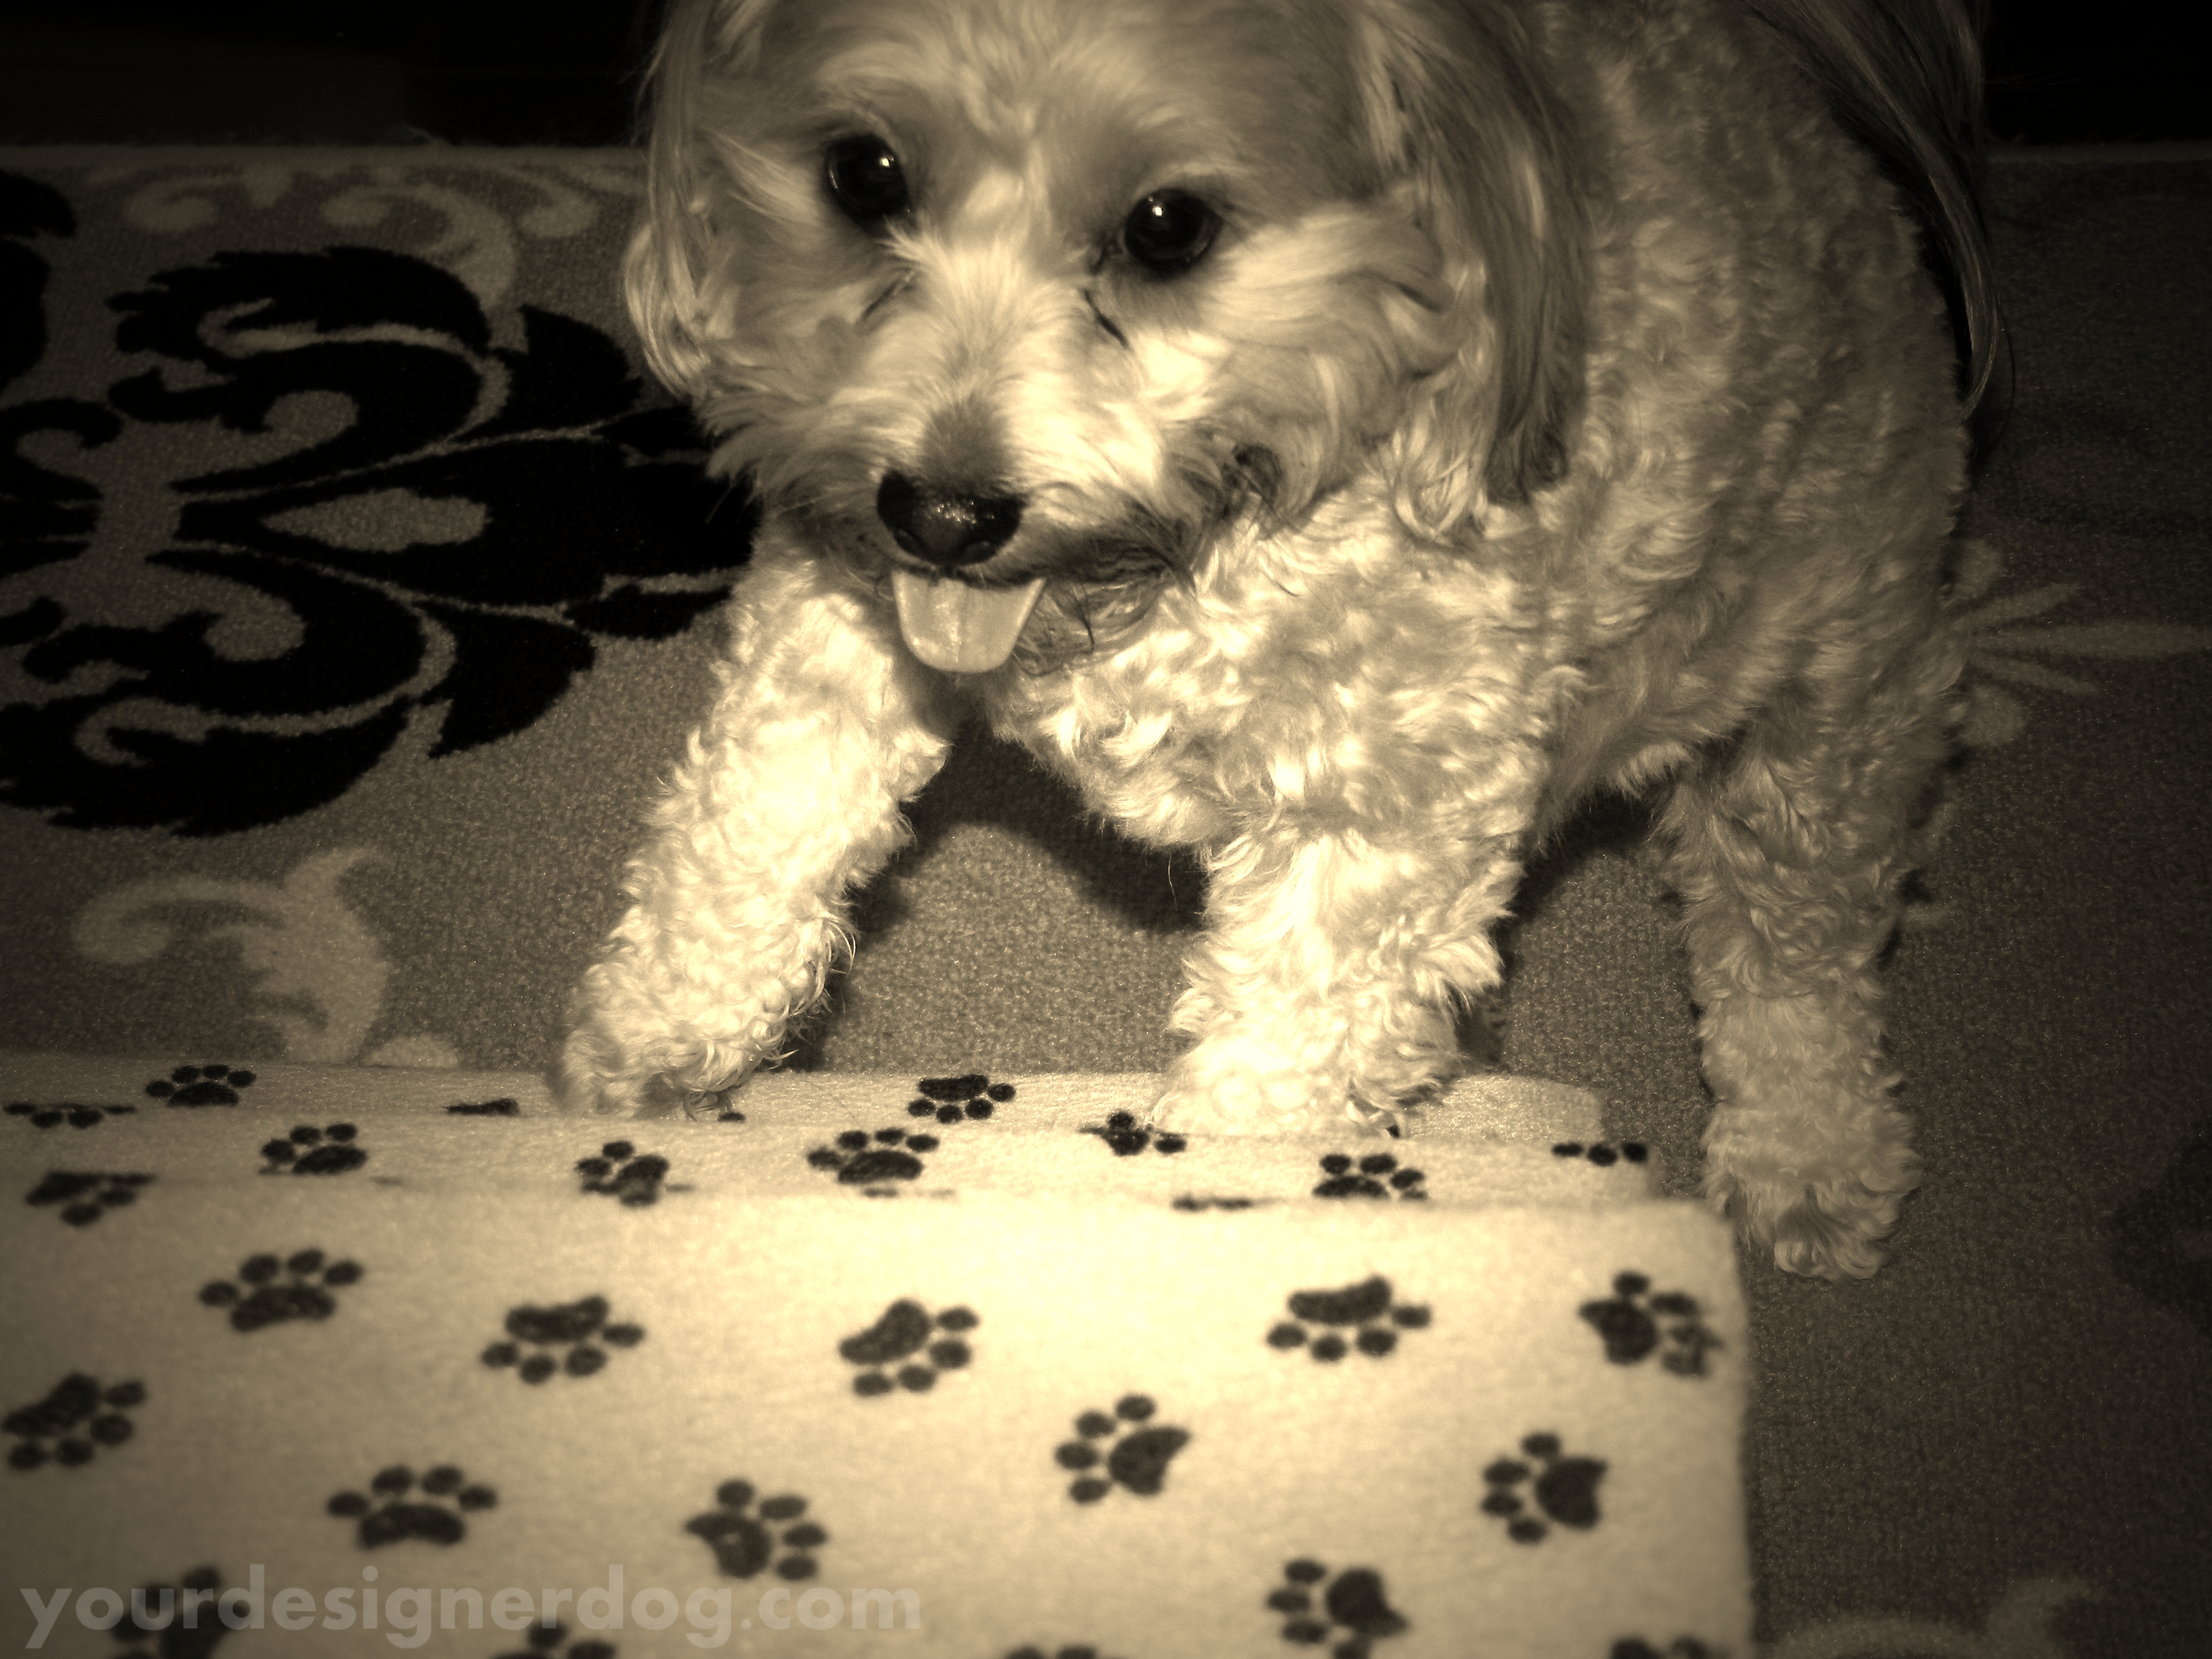 dogs, designer dogs, yorkipoo, yorkie poo, stairs, sepia photography